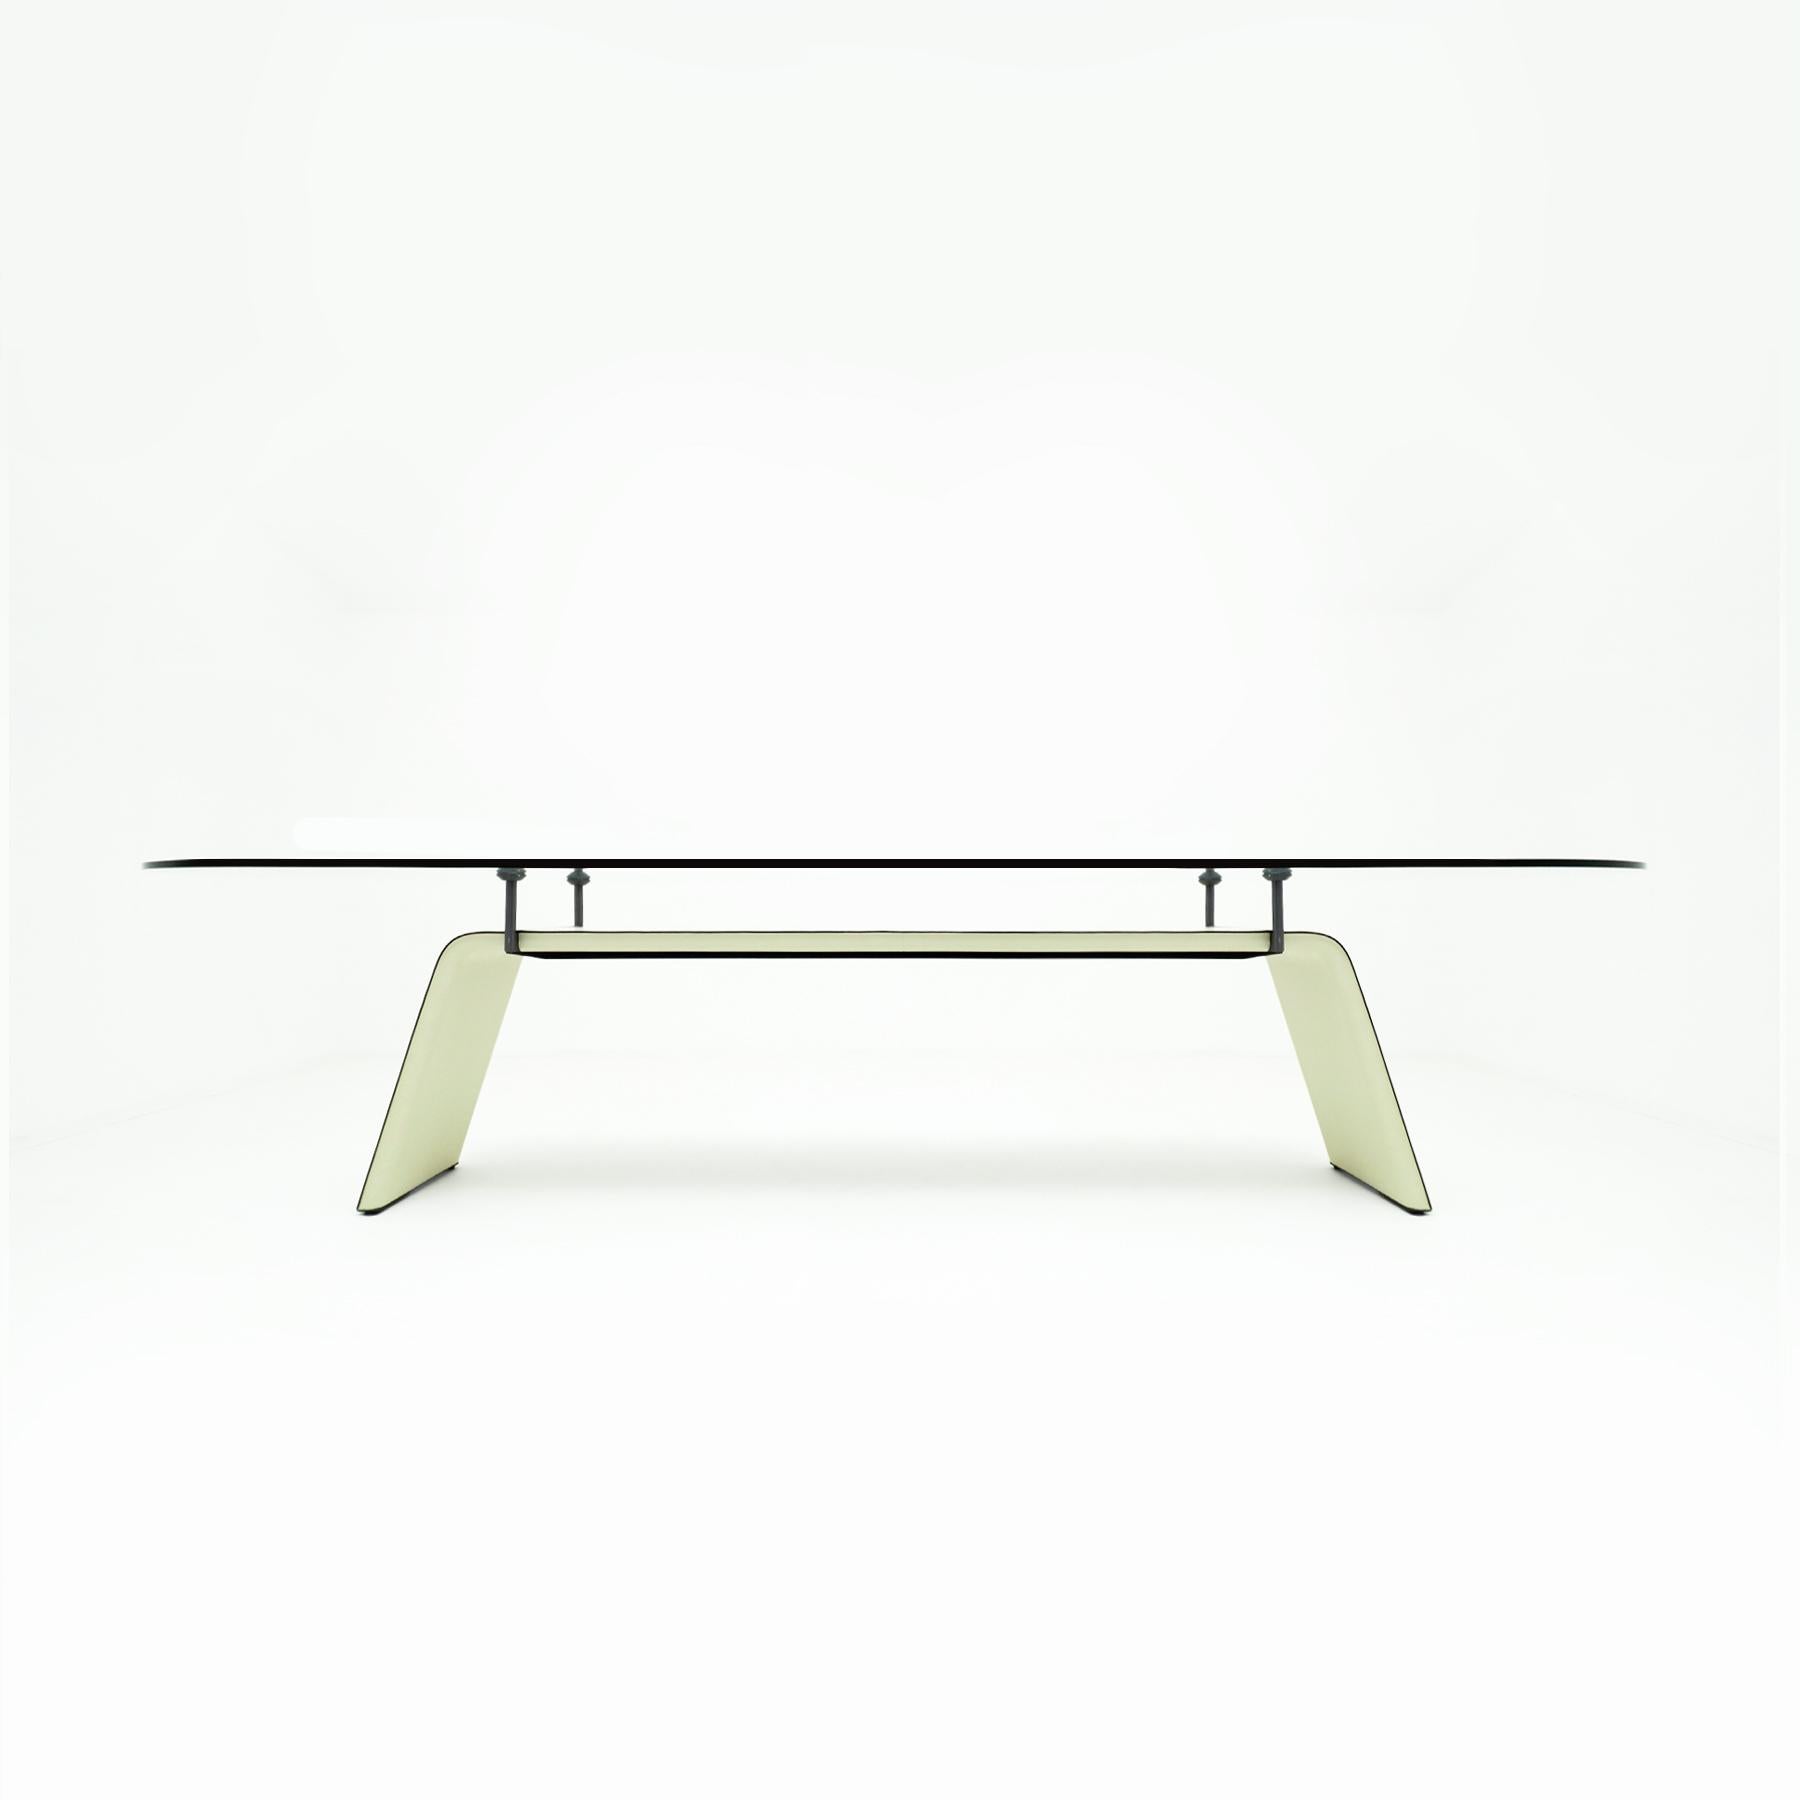 12 Knoll, Mies van der Rohe MR10 chairs matched to a Matteo Grassi dining table 2